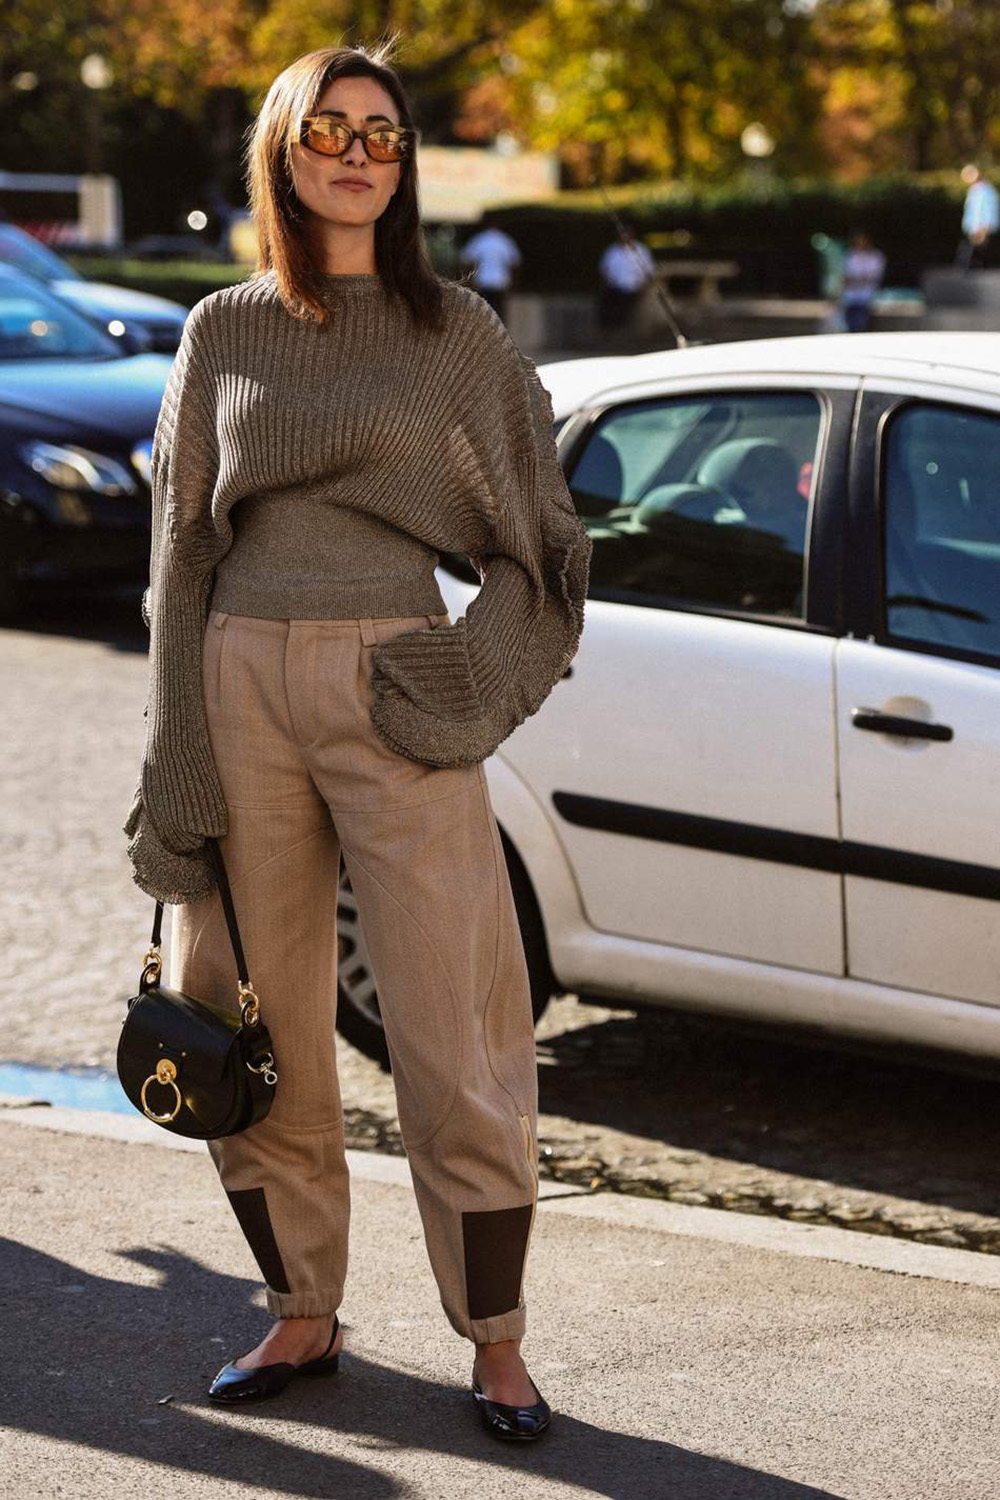 Precious Cargo: The practical pant trend that’s replacing your mom jeans (and fast) |